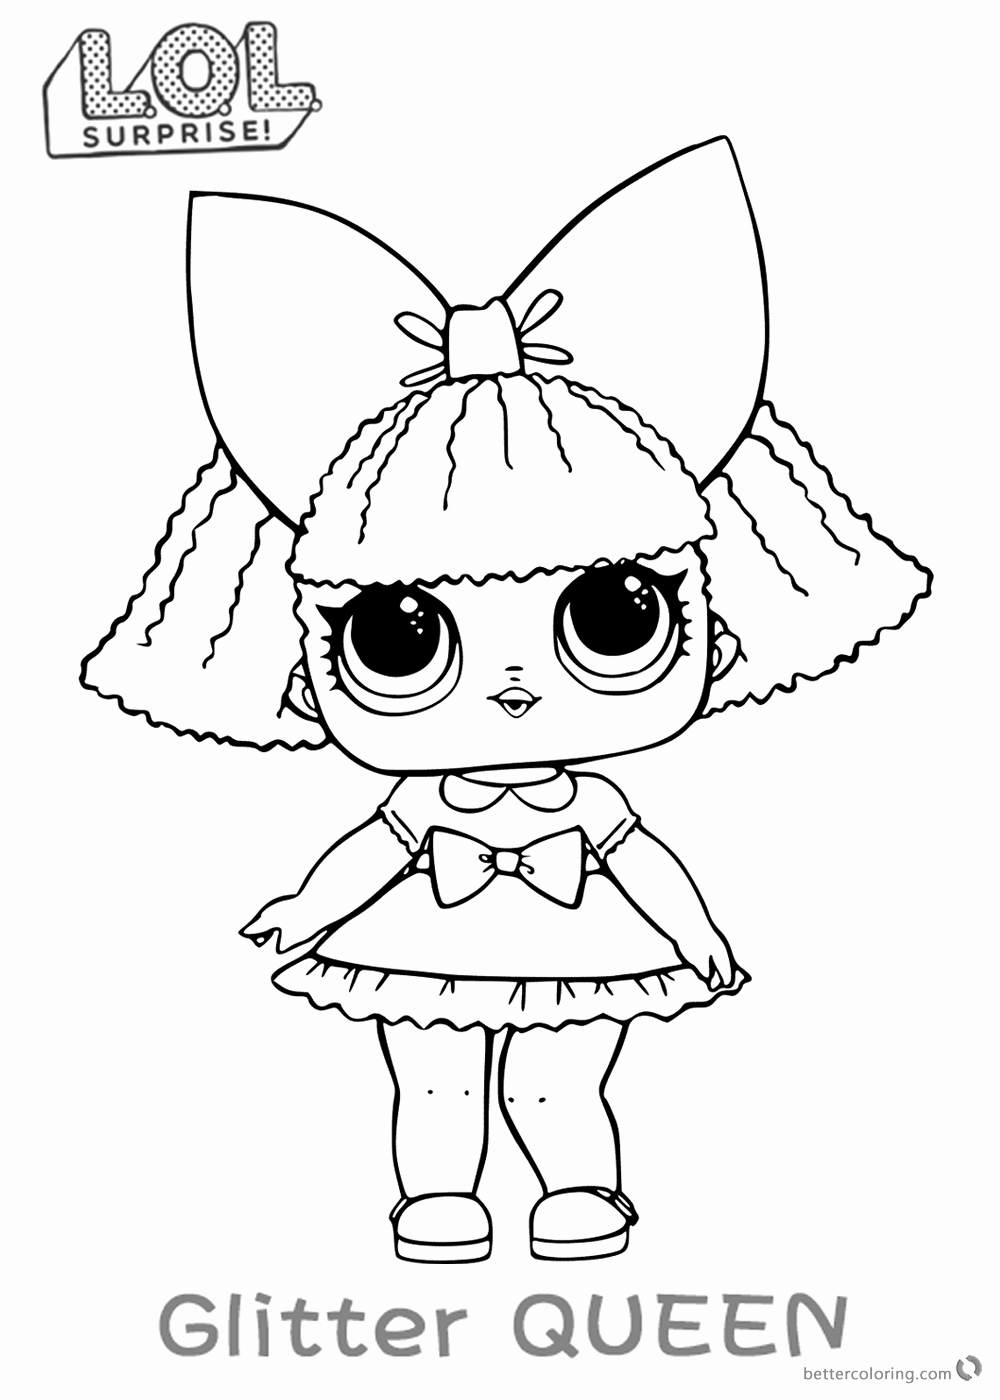 Lol Dolls Coloring Pages at GetColorings.com | Free ...